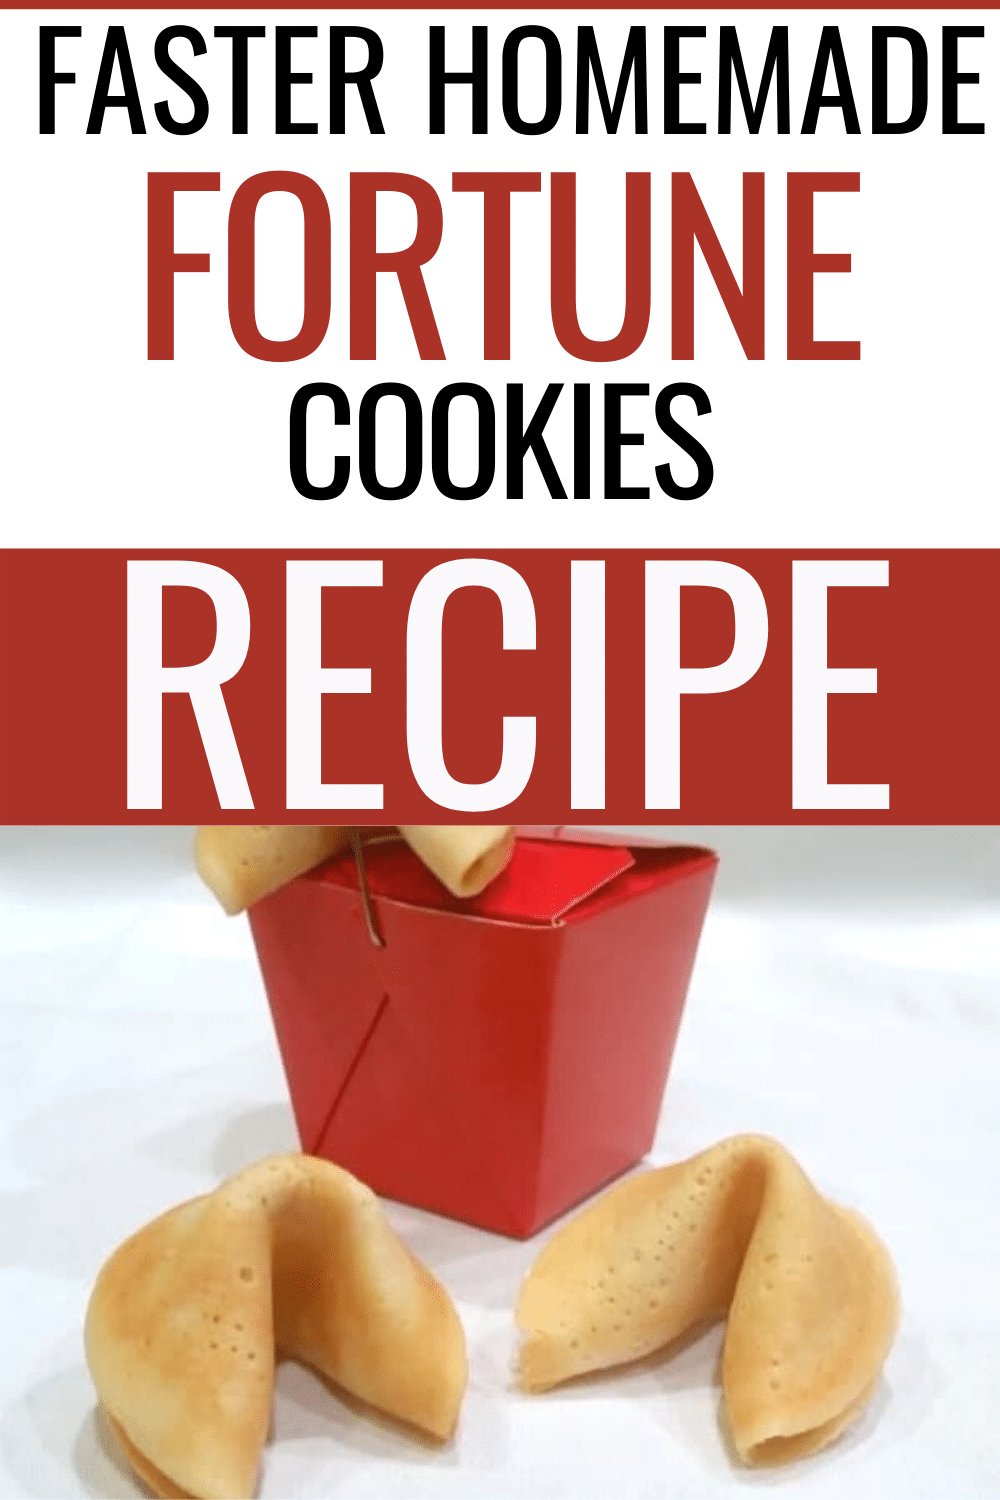 If you want to make fortune cookies, but don't have all day, here's a faster way to make homemade fortune cookies than baking one or two at a time. #fortunecookies #homemadefortunecookies #recipe via @wondermomwannab